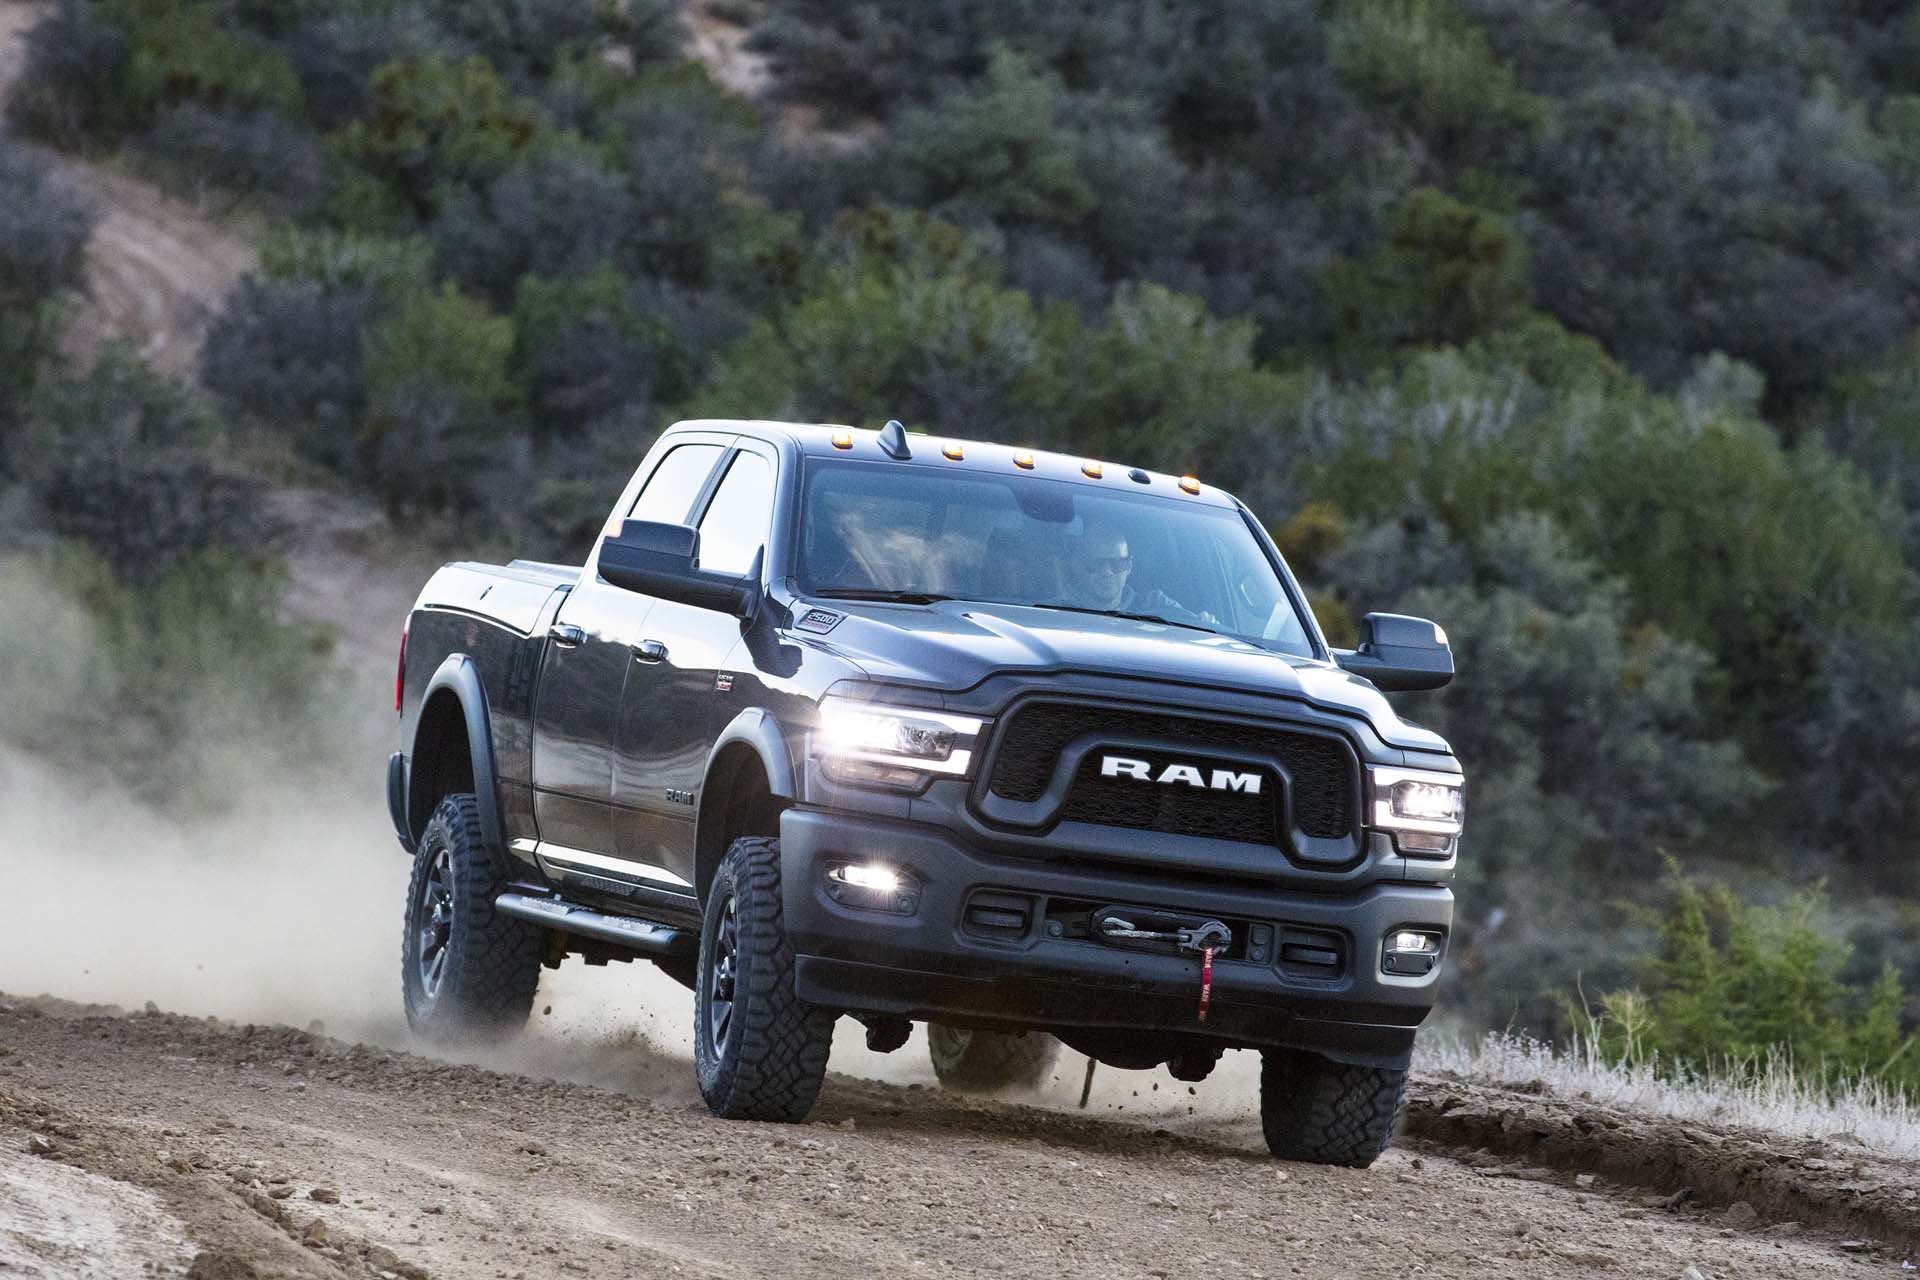 Gallery of 2019 Ram 2500 Power Wagon Wallpapers Photos 49 Of. 